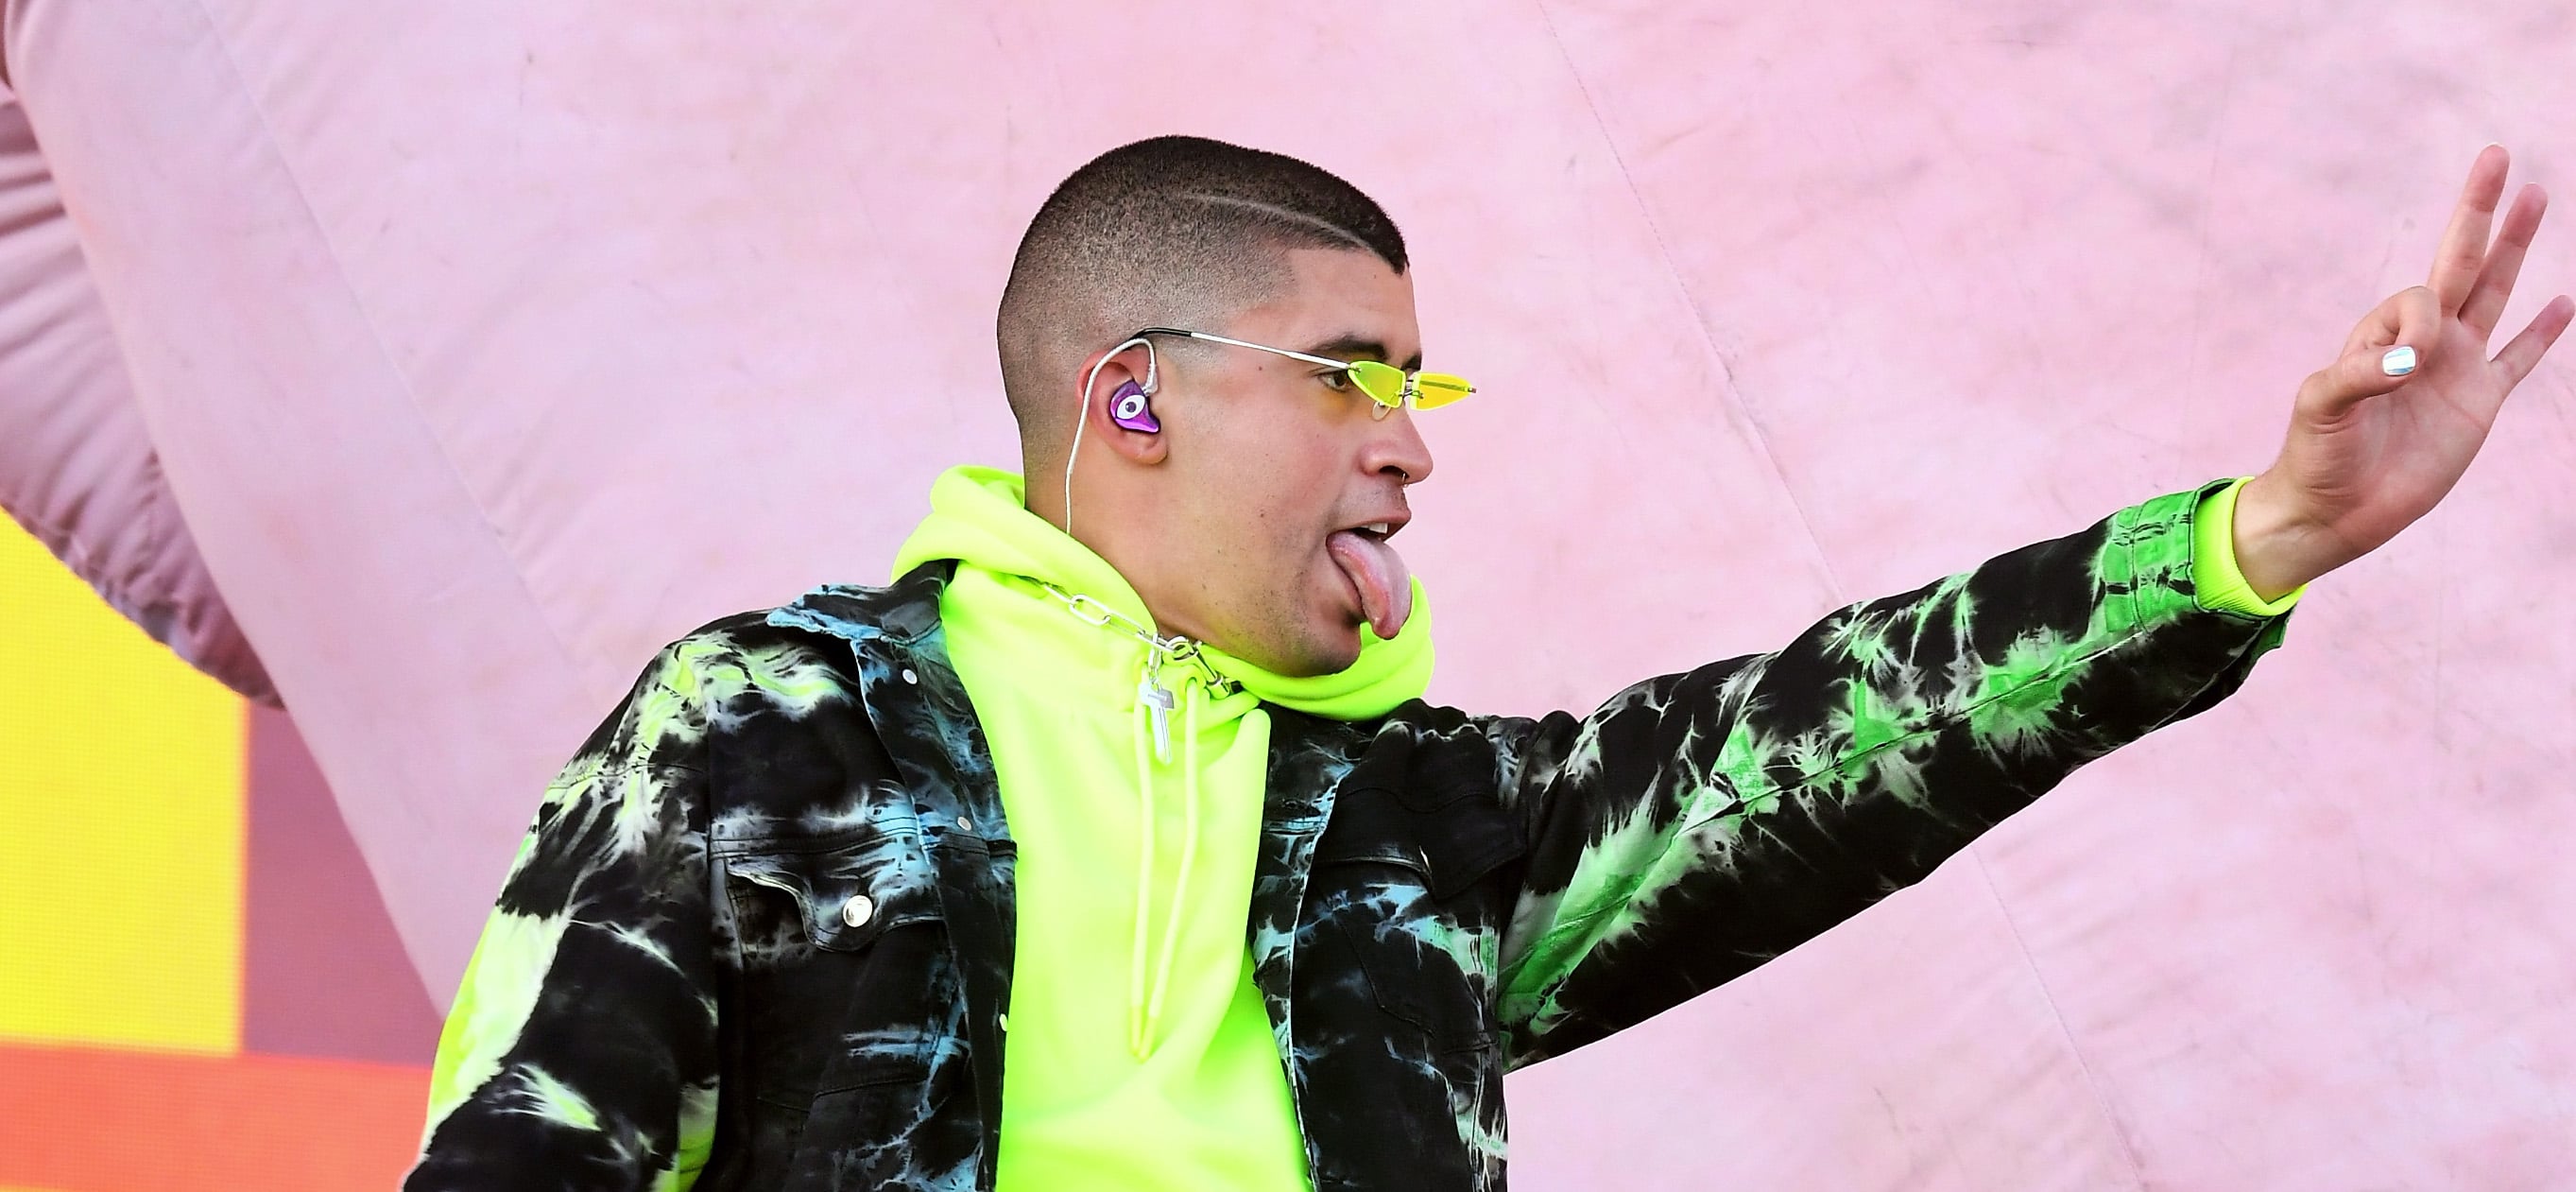 Spotify Summer Songs Almost Half Of Most Streamed Songs By Latinos